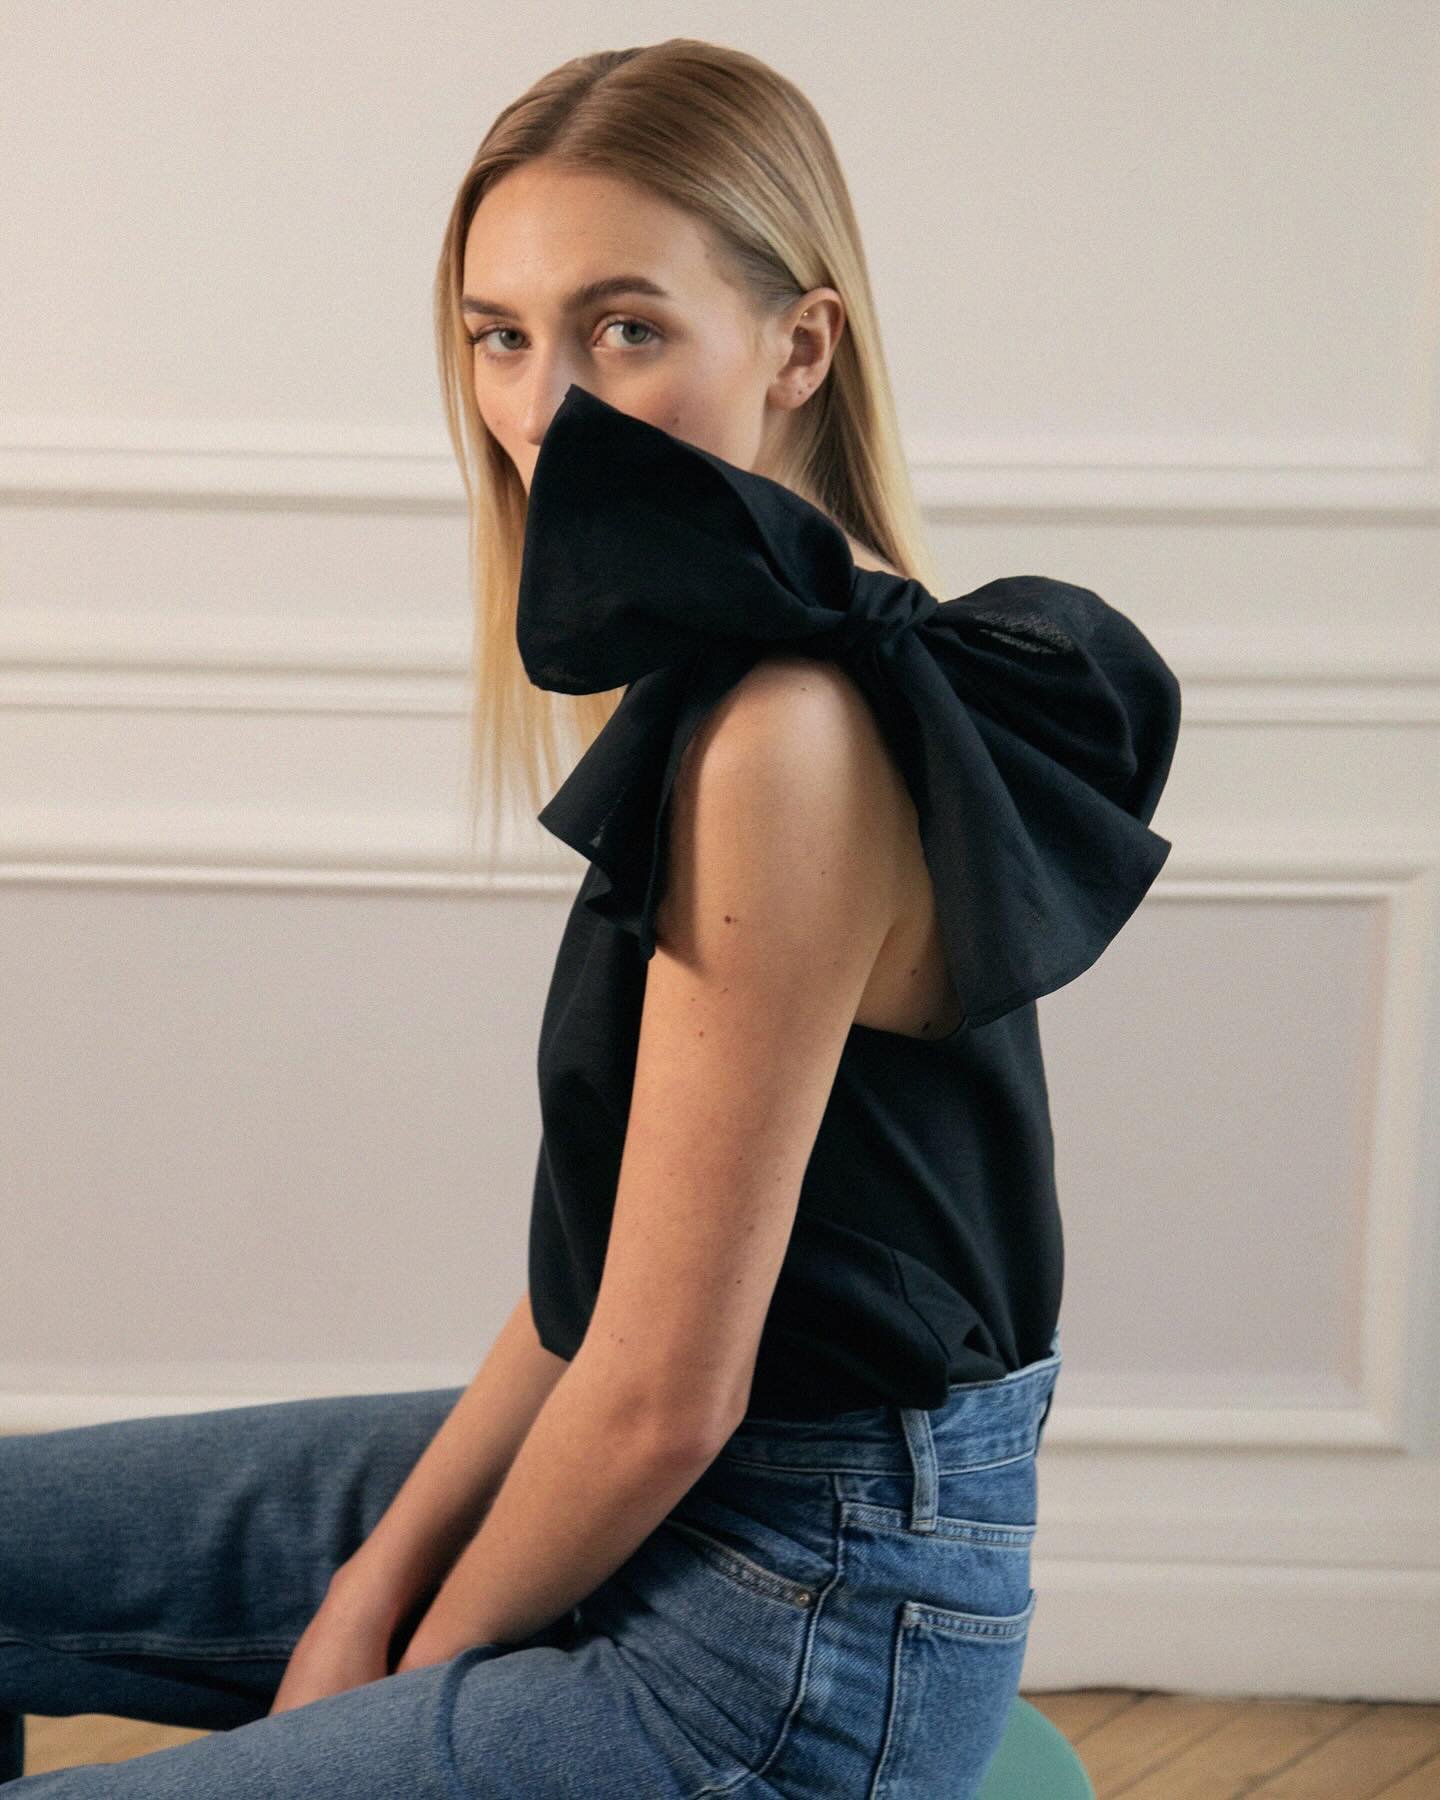 LE TELIO
Love at First Sight

Undeniably chic, the one-shoulder top is the summer staple piece you need this season to elevate your outfit. Featuring an asymmetrical neckline and gathered by two draped ties that either cascade over the shoulder, or c